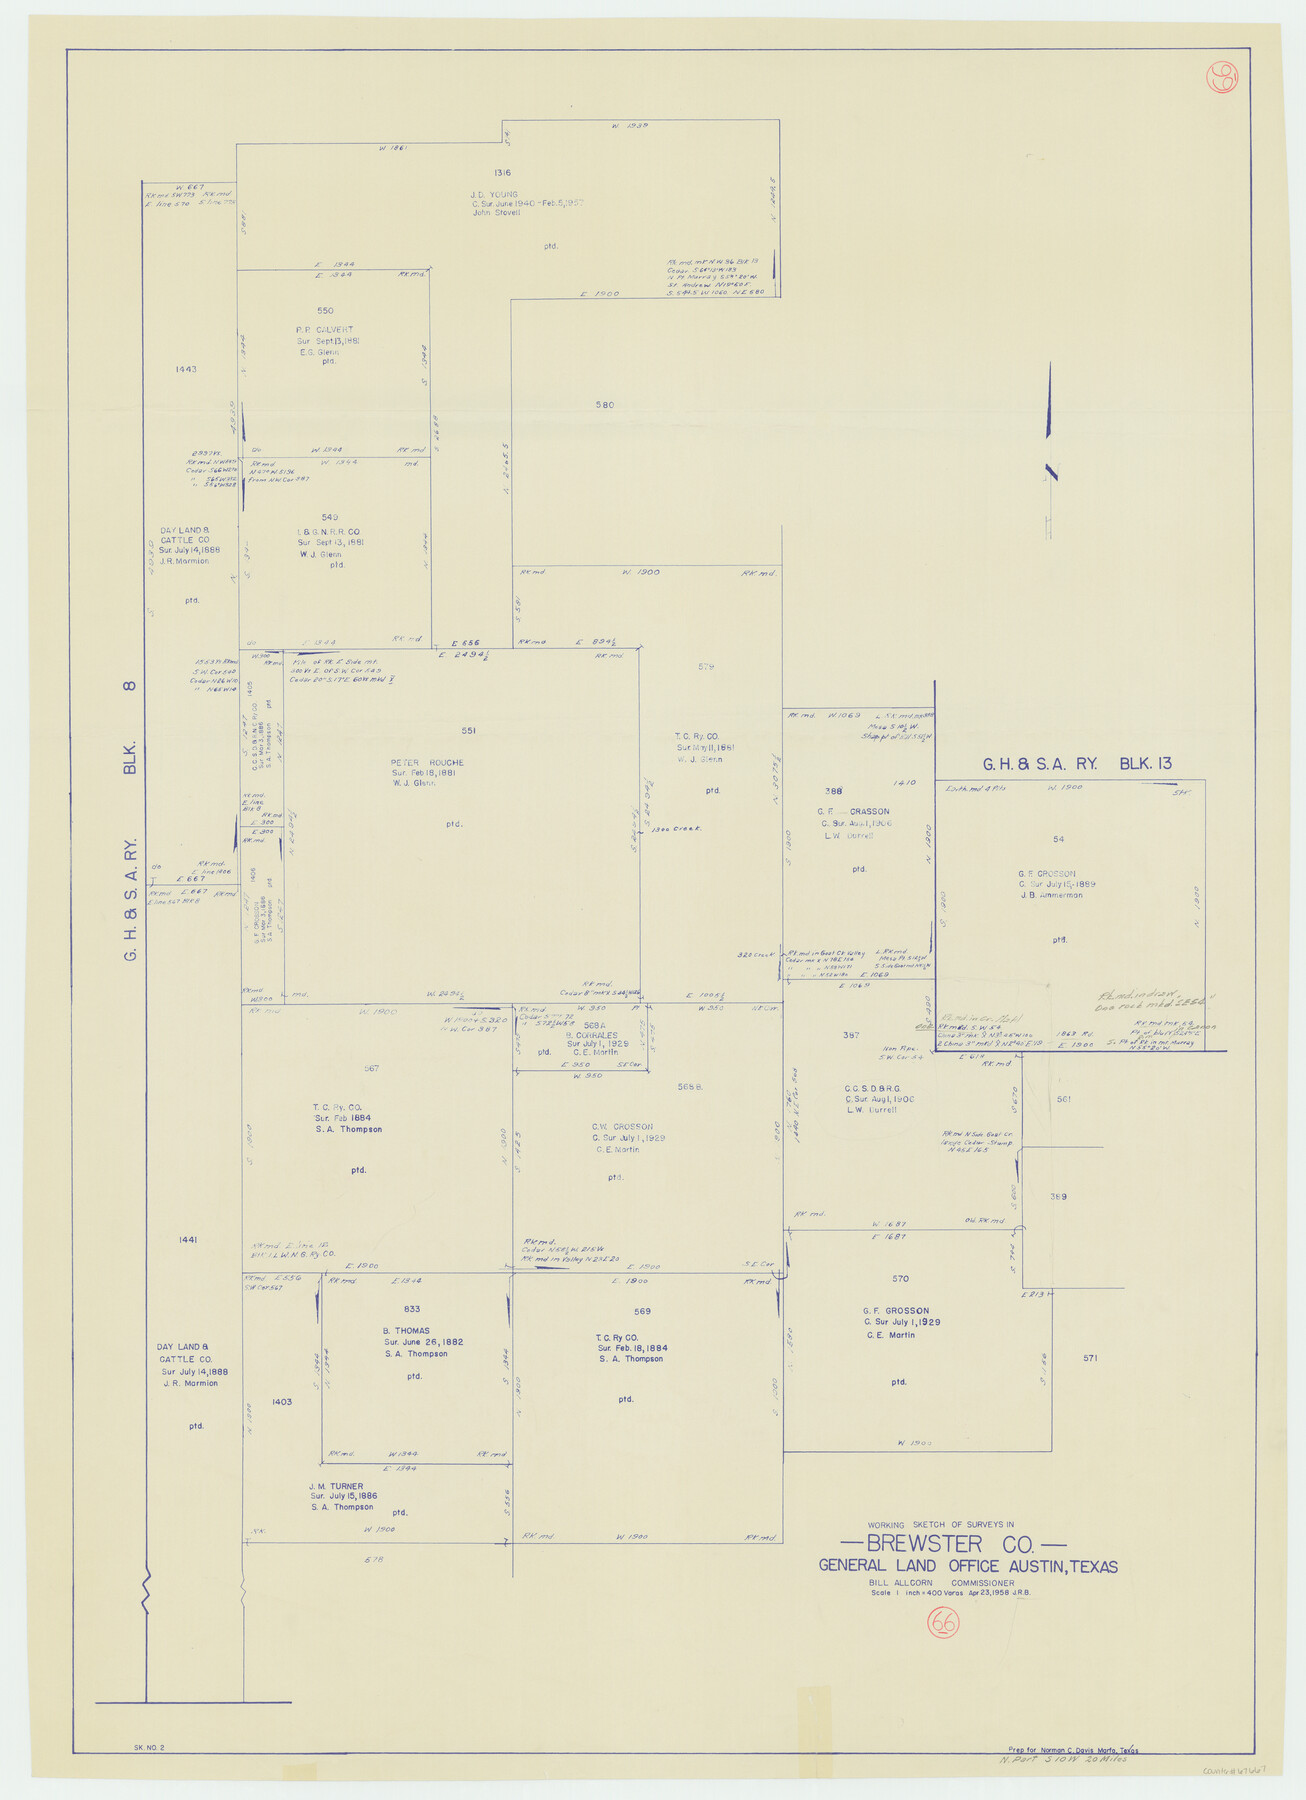 67667, Brewster County Working Sketch 66, General Map Collection